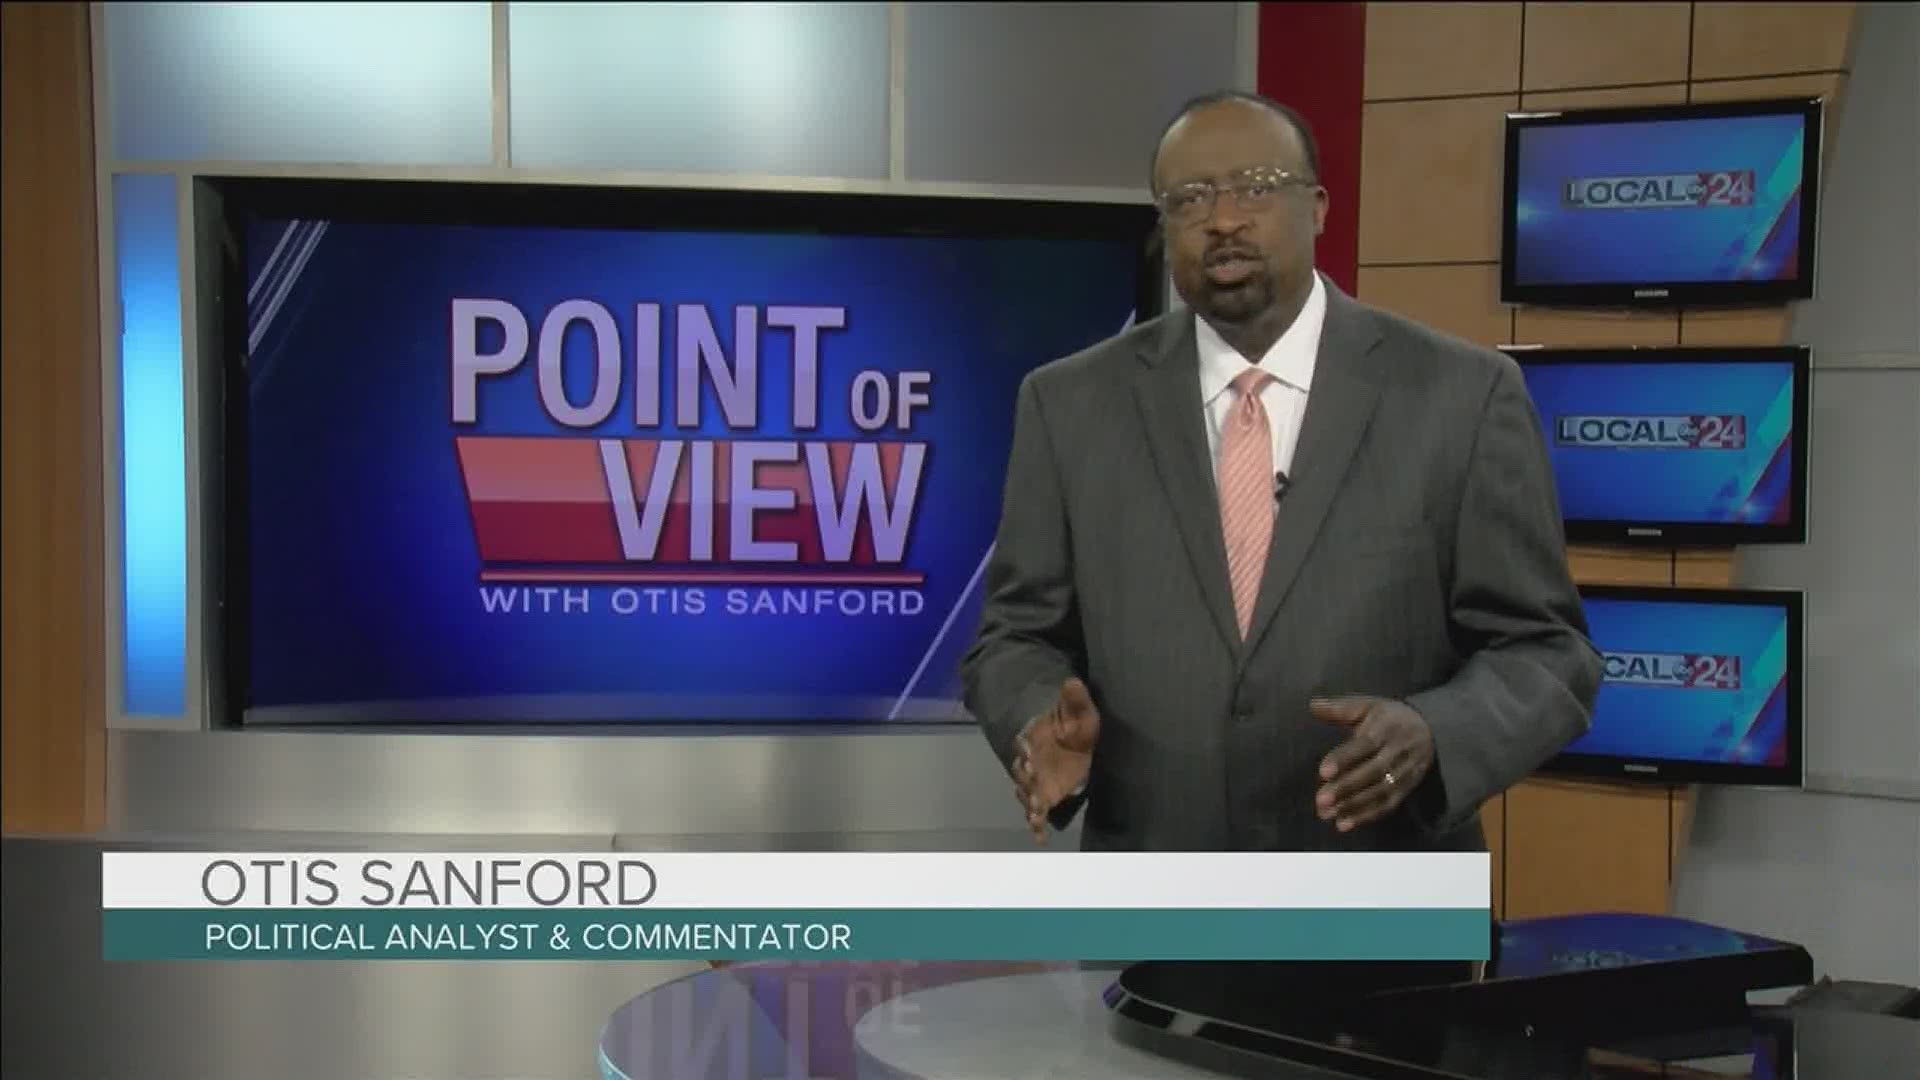 Local 24 News political analyst and commentator Otis Sanford shares his point of view on Shelby County schools going to full virtual learning in fall.